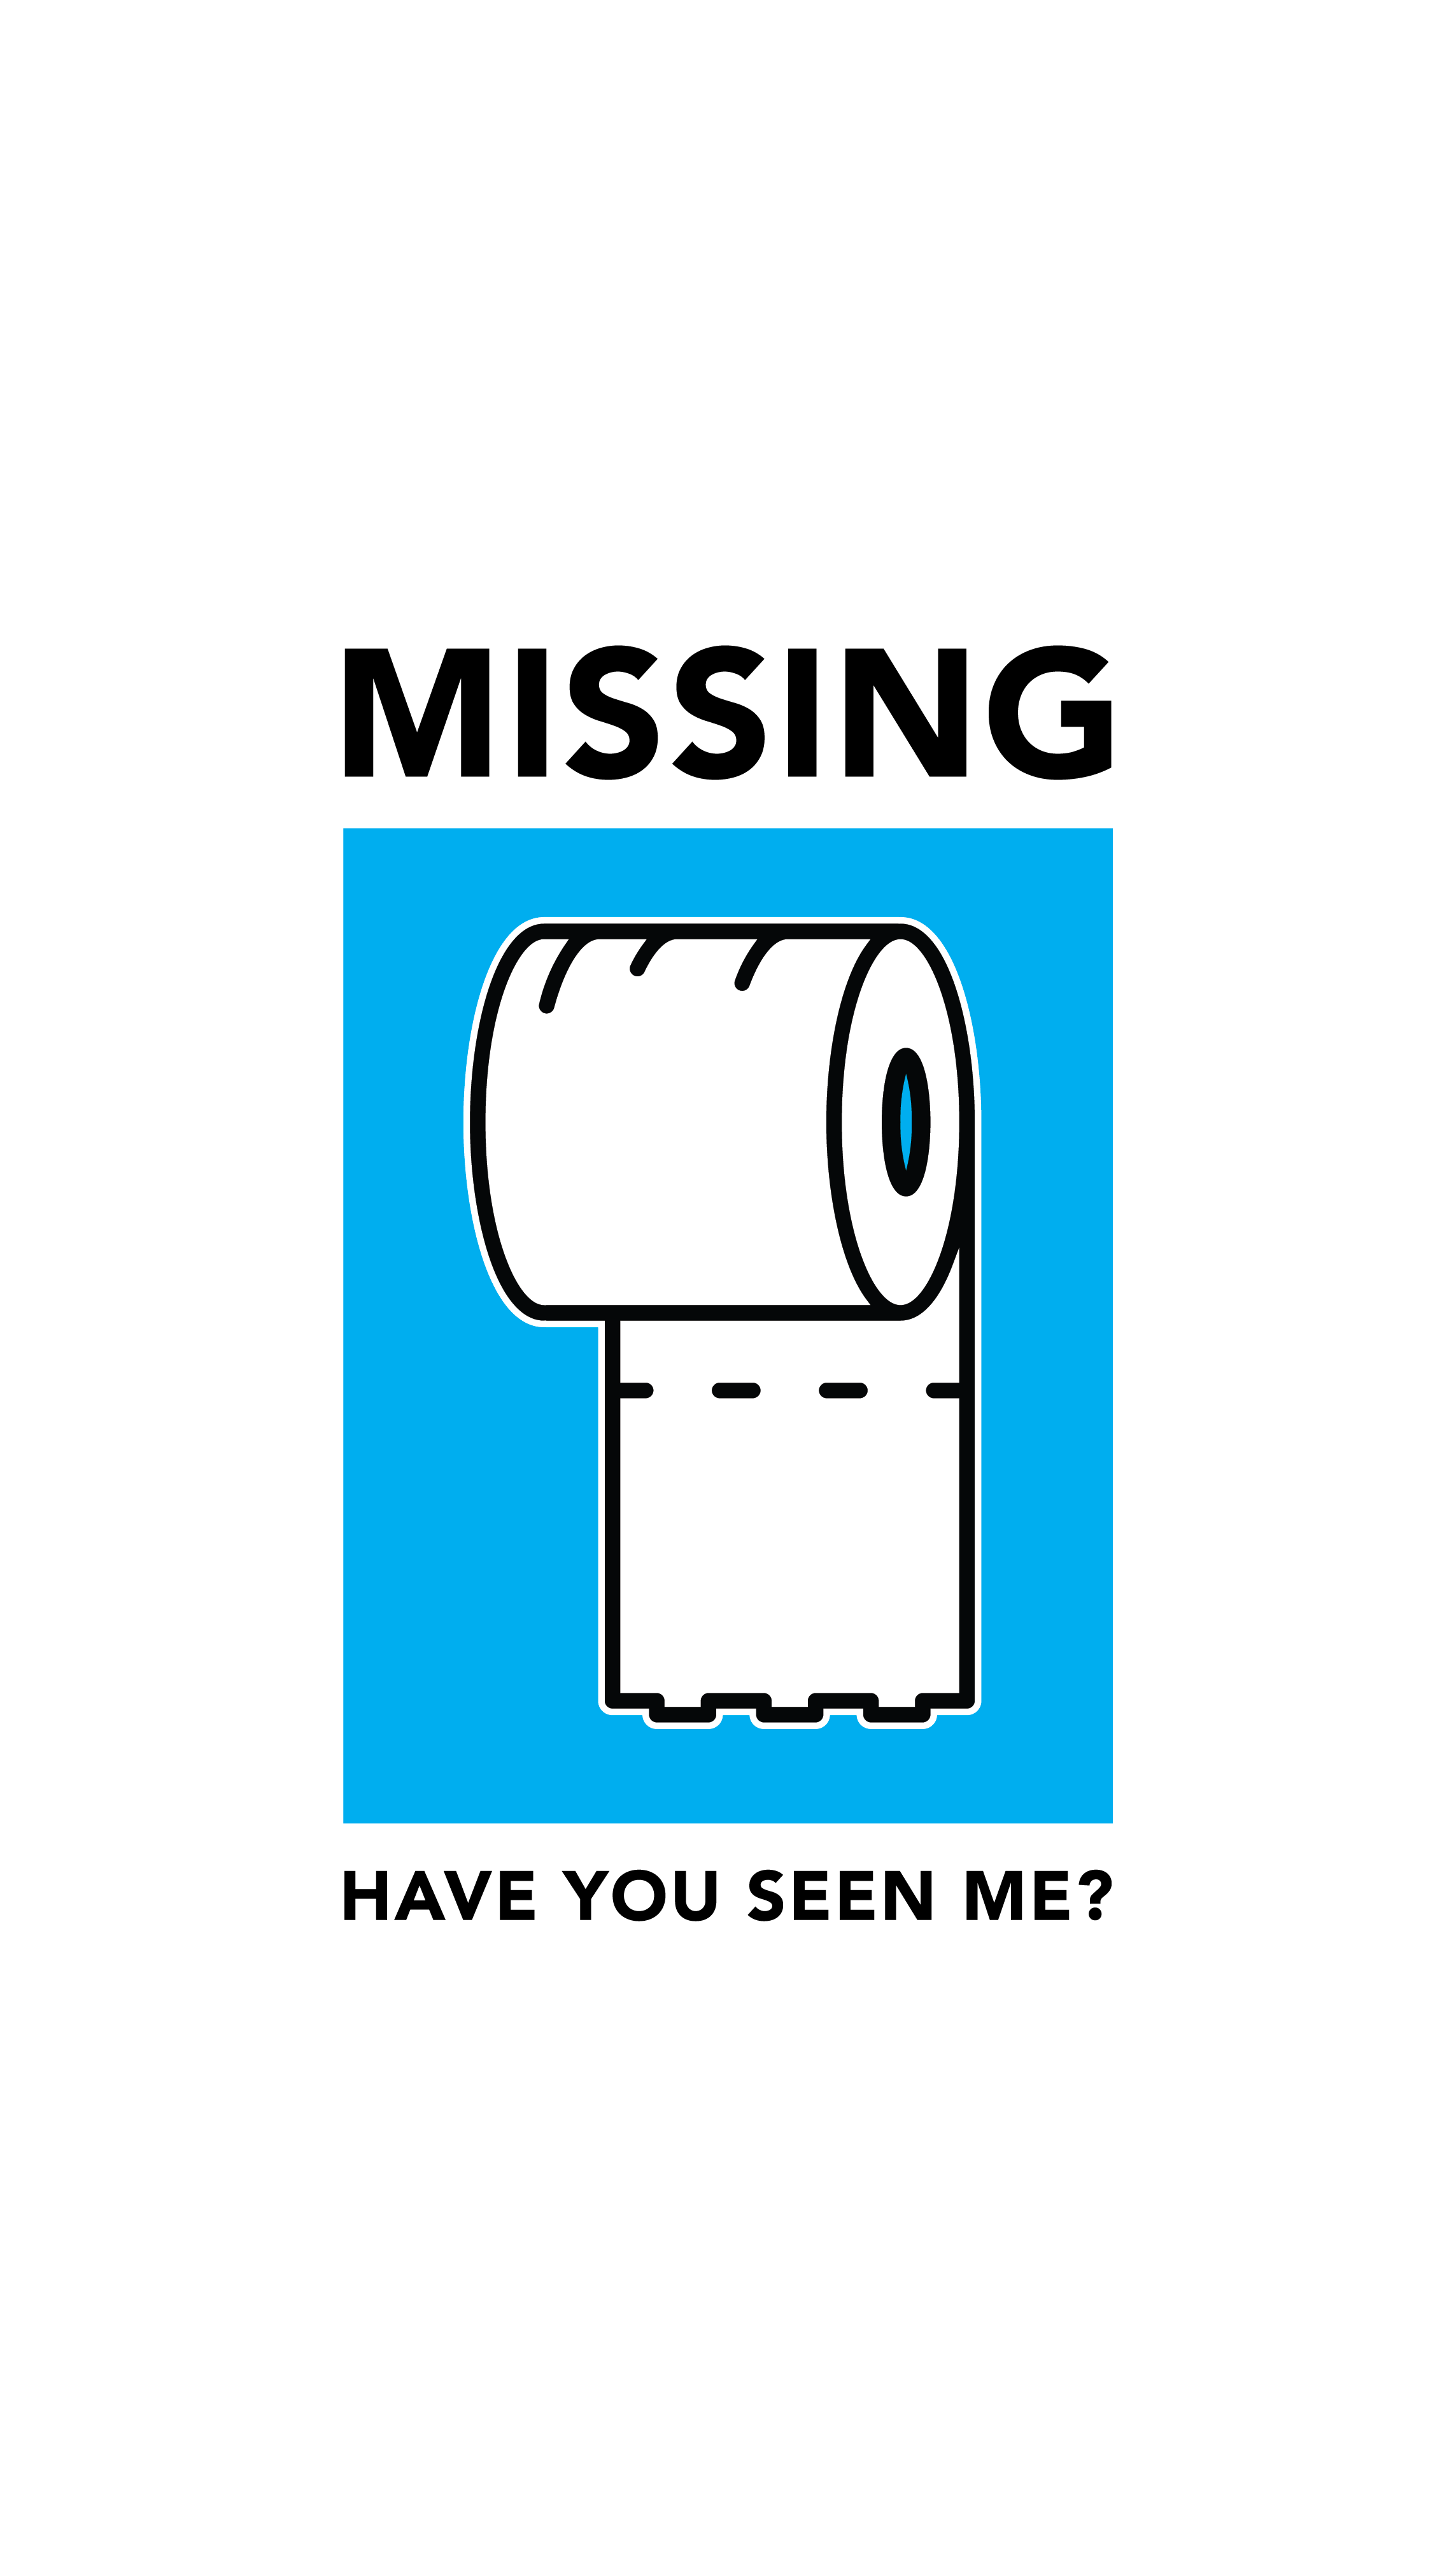 Missing toilet paper. Have you seen me?